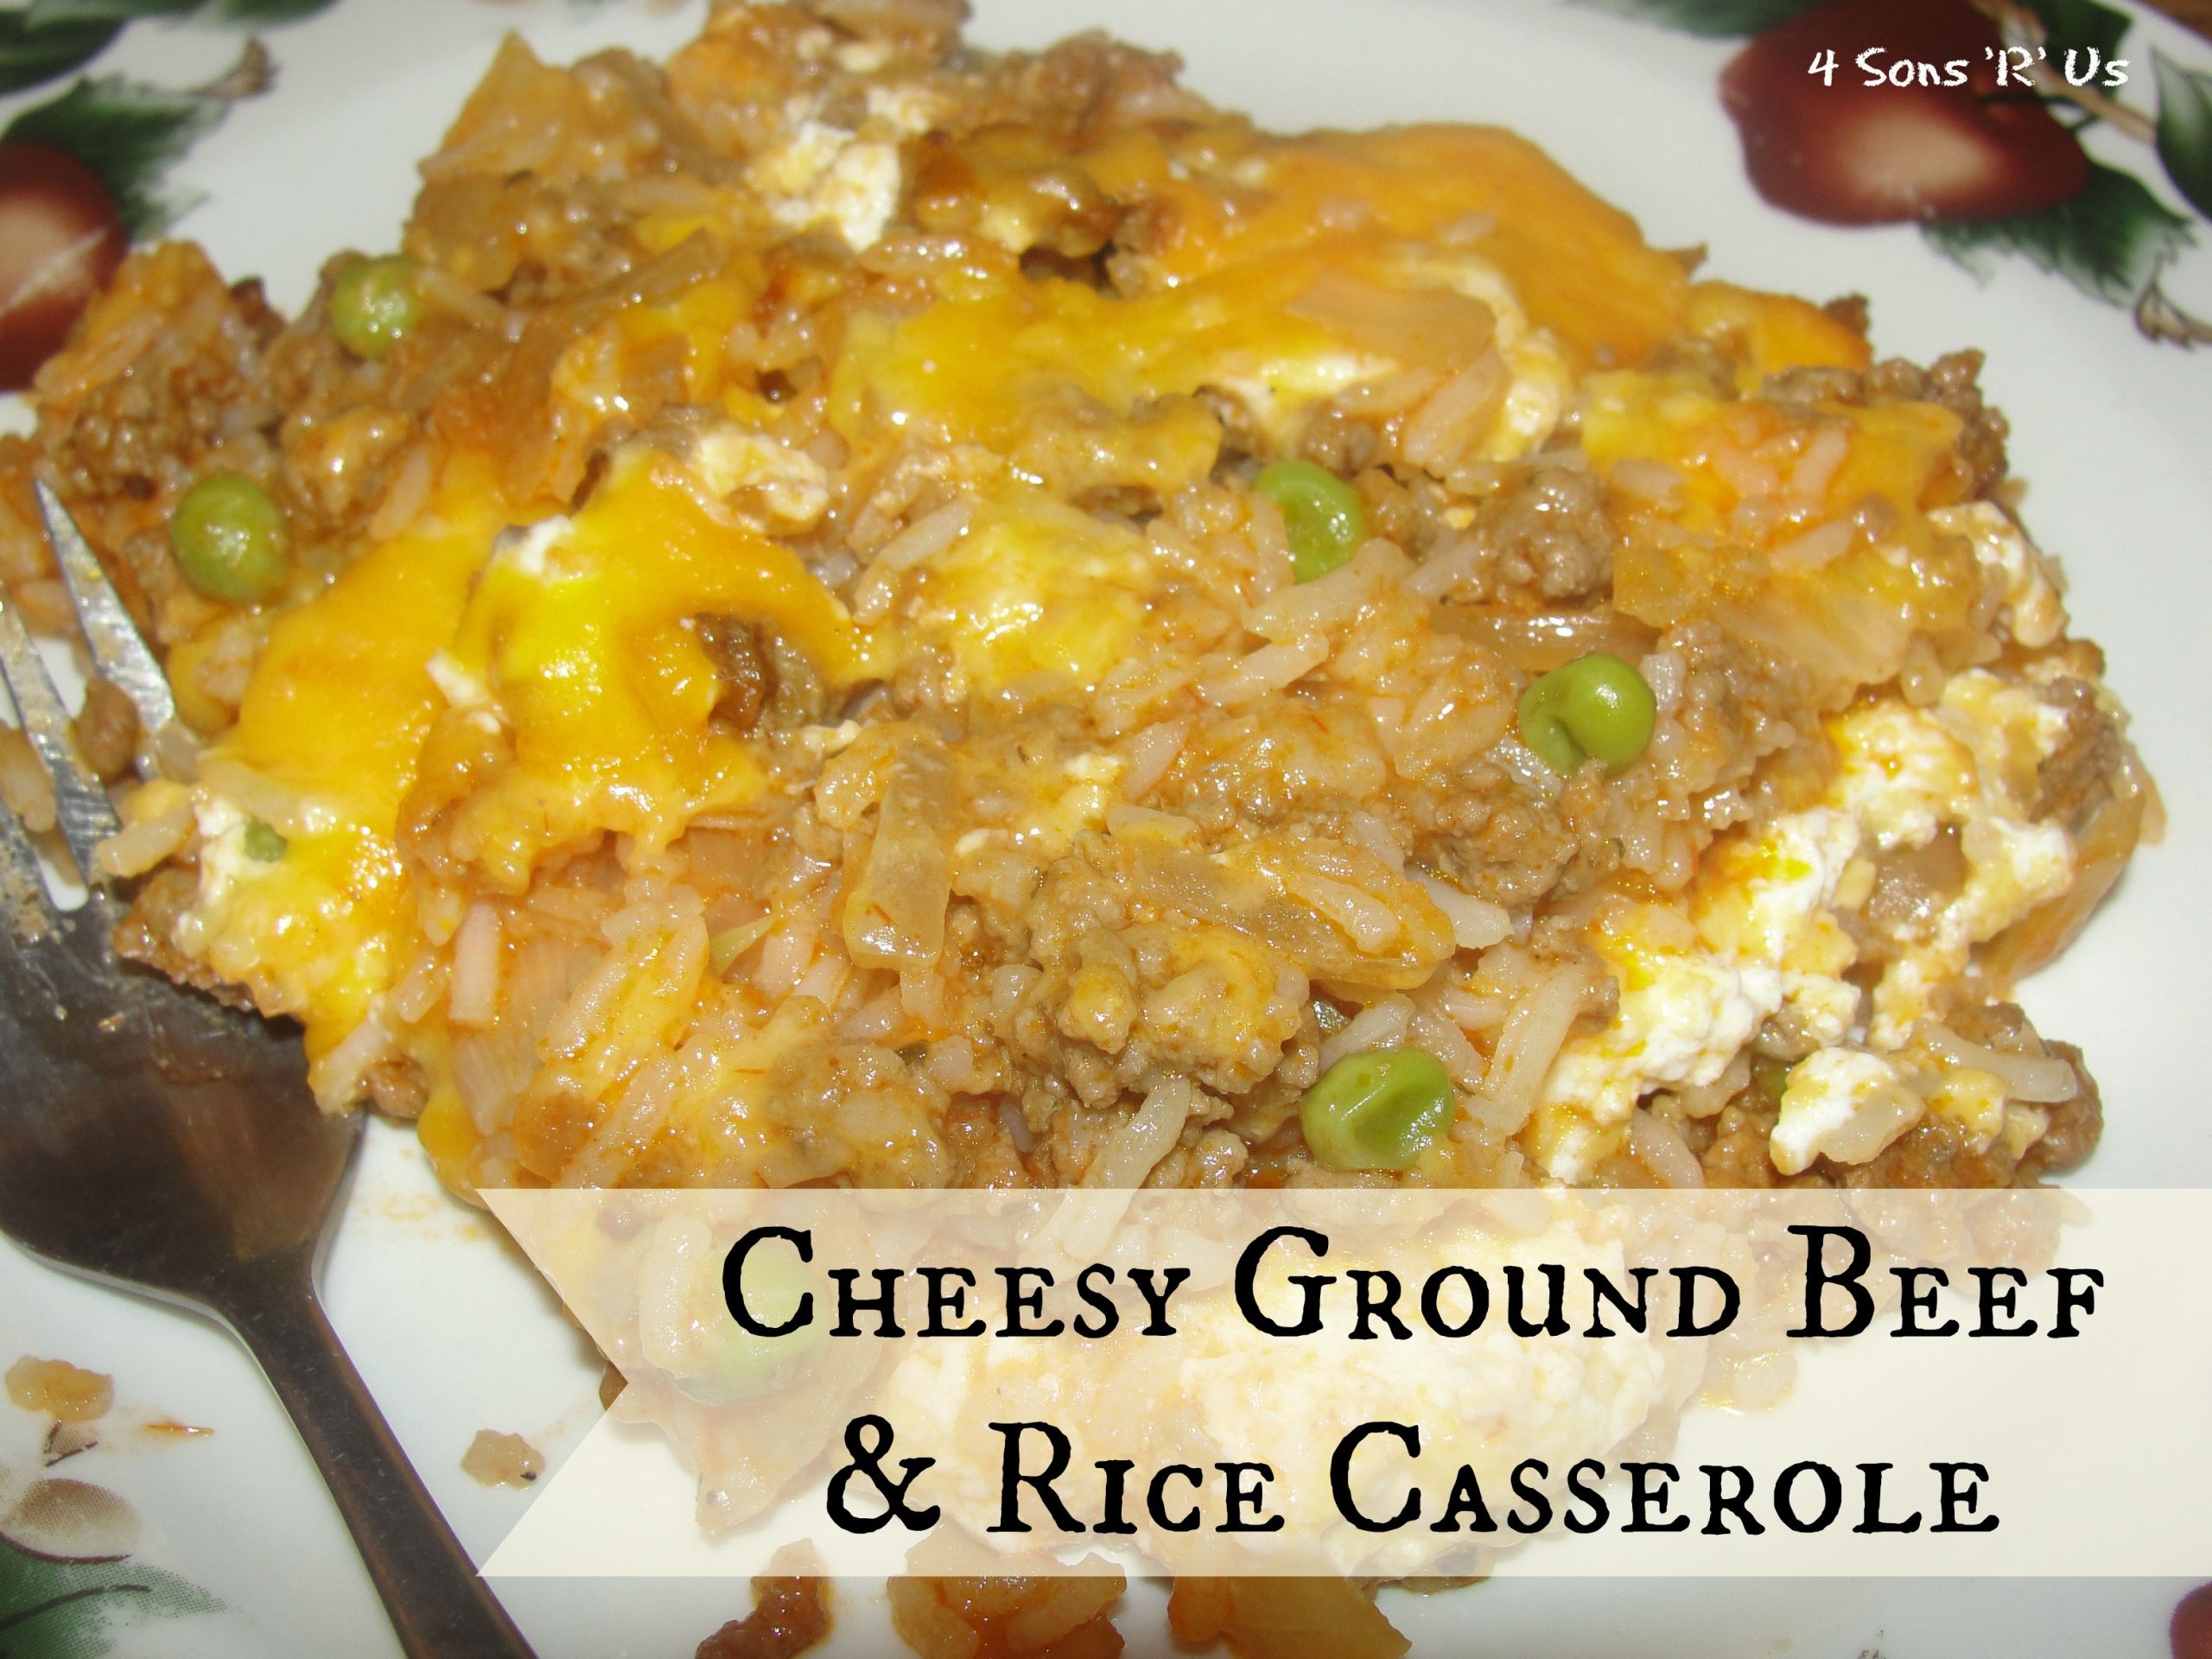 Ground Beef And Rice Casserole With Tomato Sauce
 Cheesy Ground Beef And Rice Casserole 4 Sons R Us